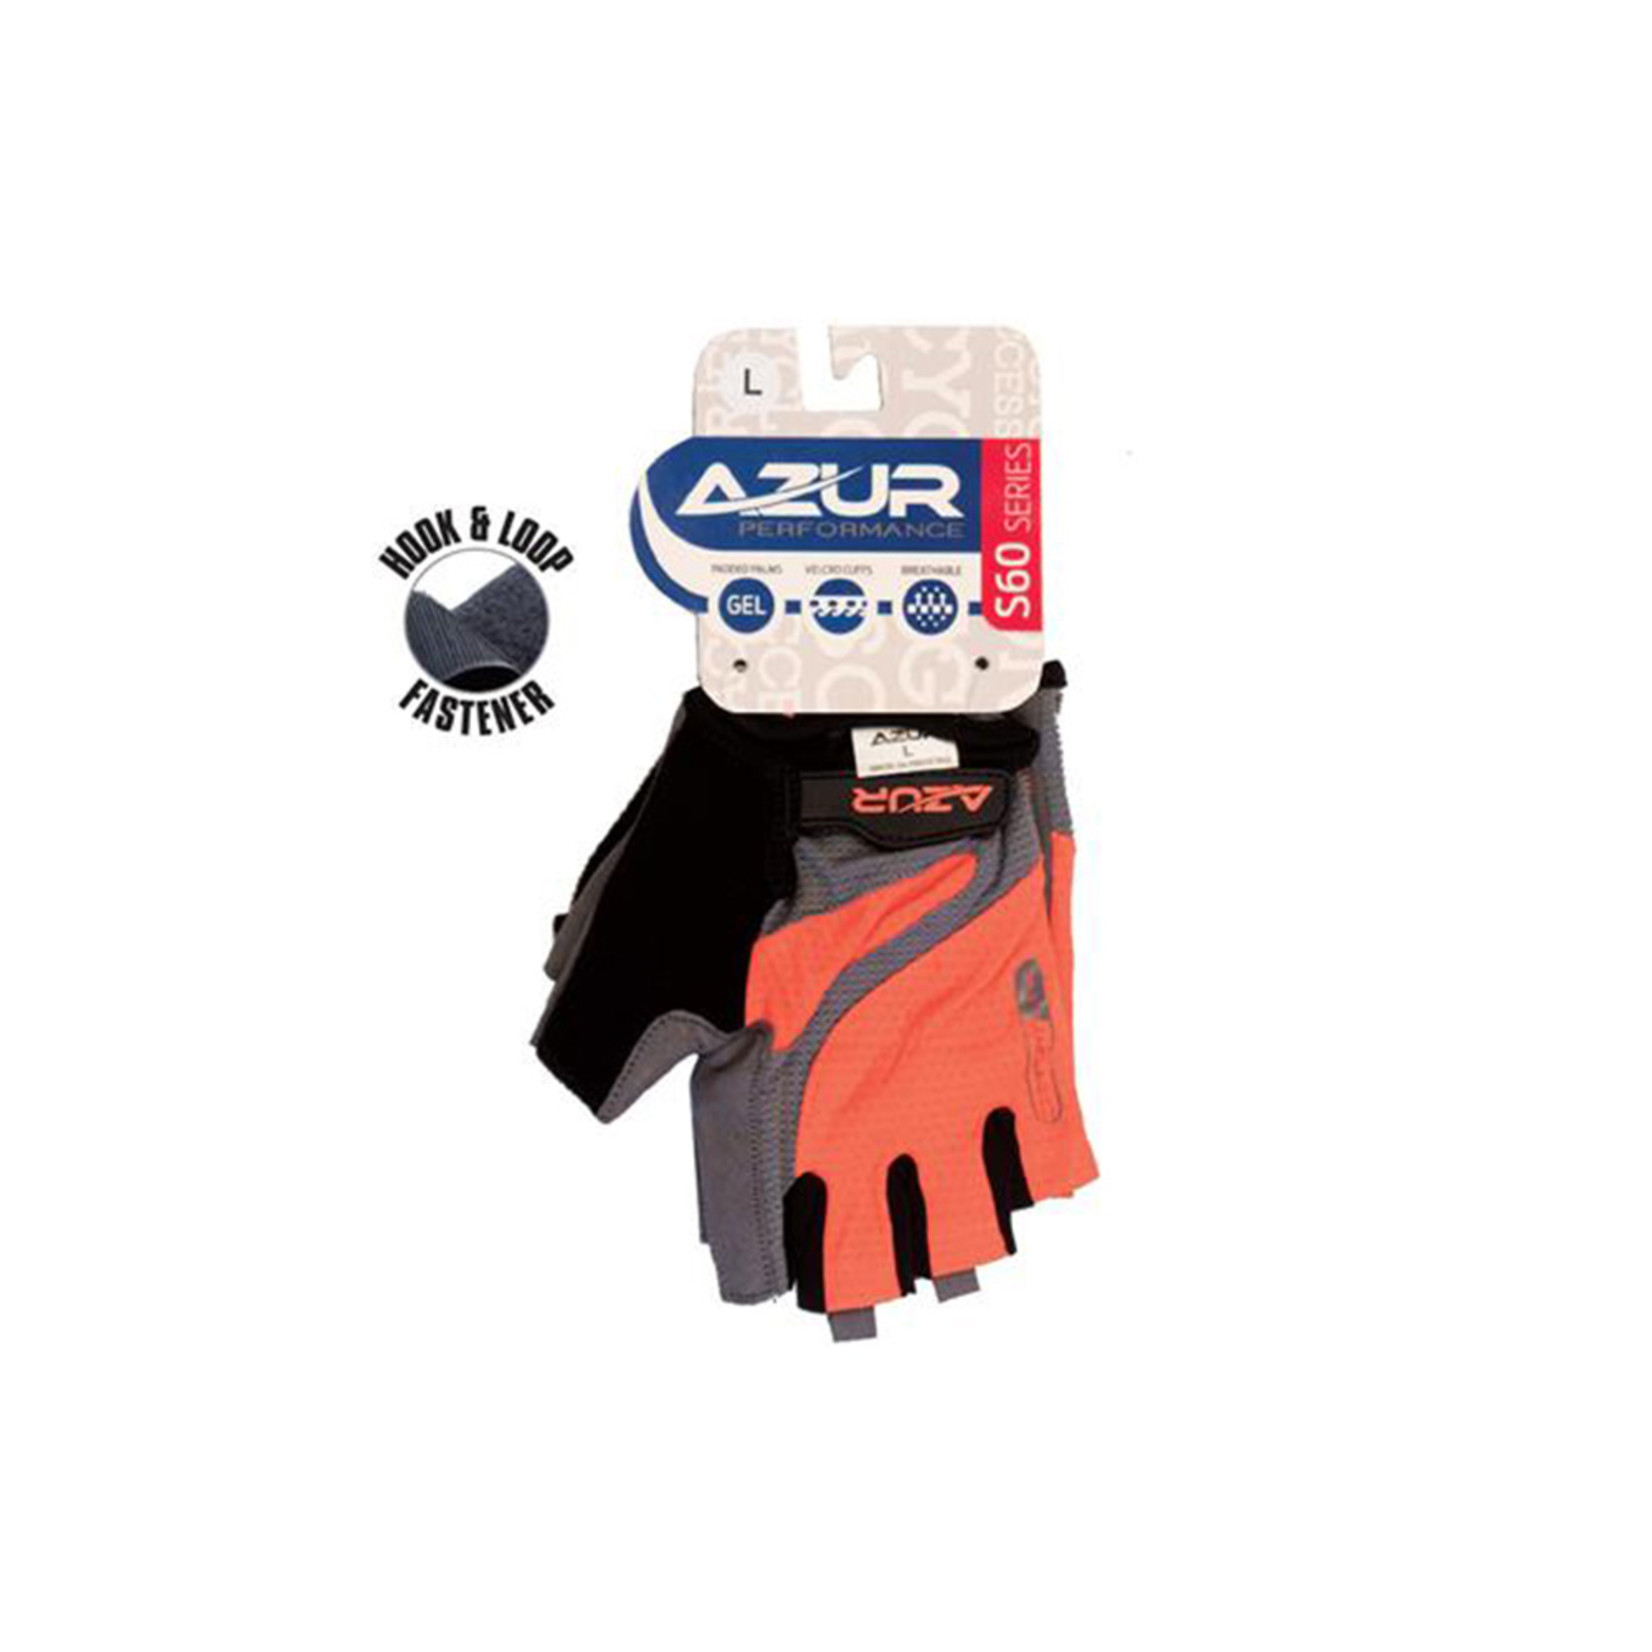 Azur Azur Bike/Cycling Glove - Synthetic Plam - S60 Series - Peach - Large